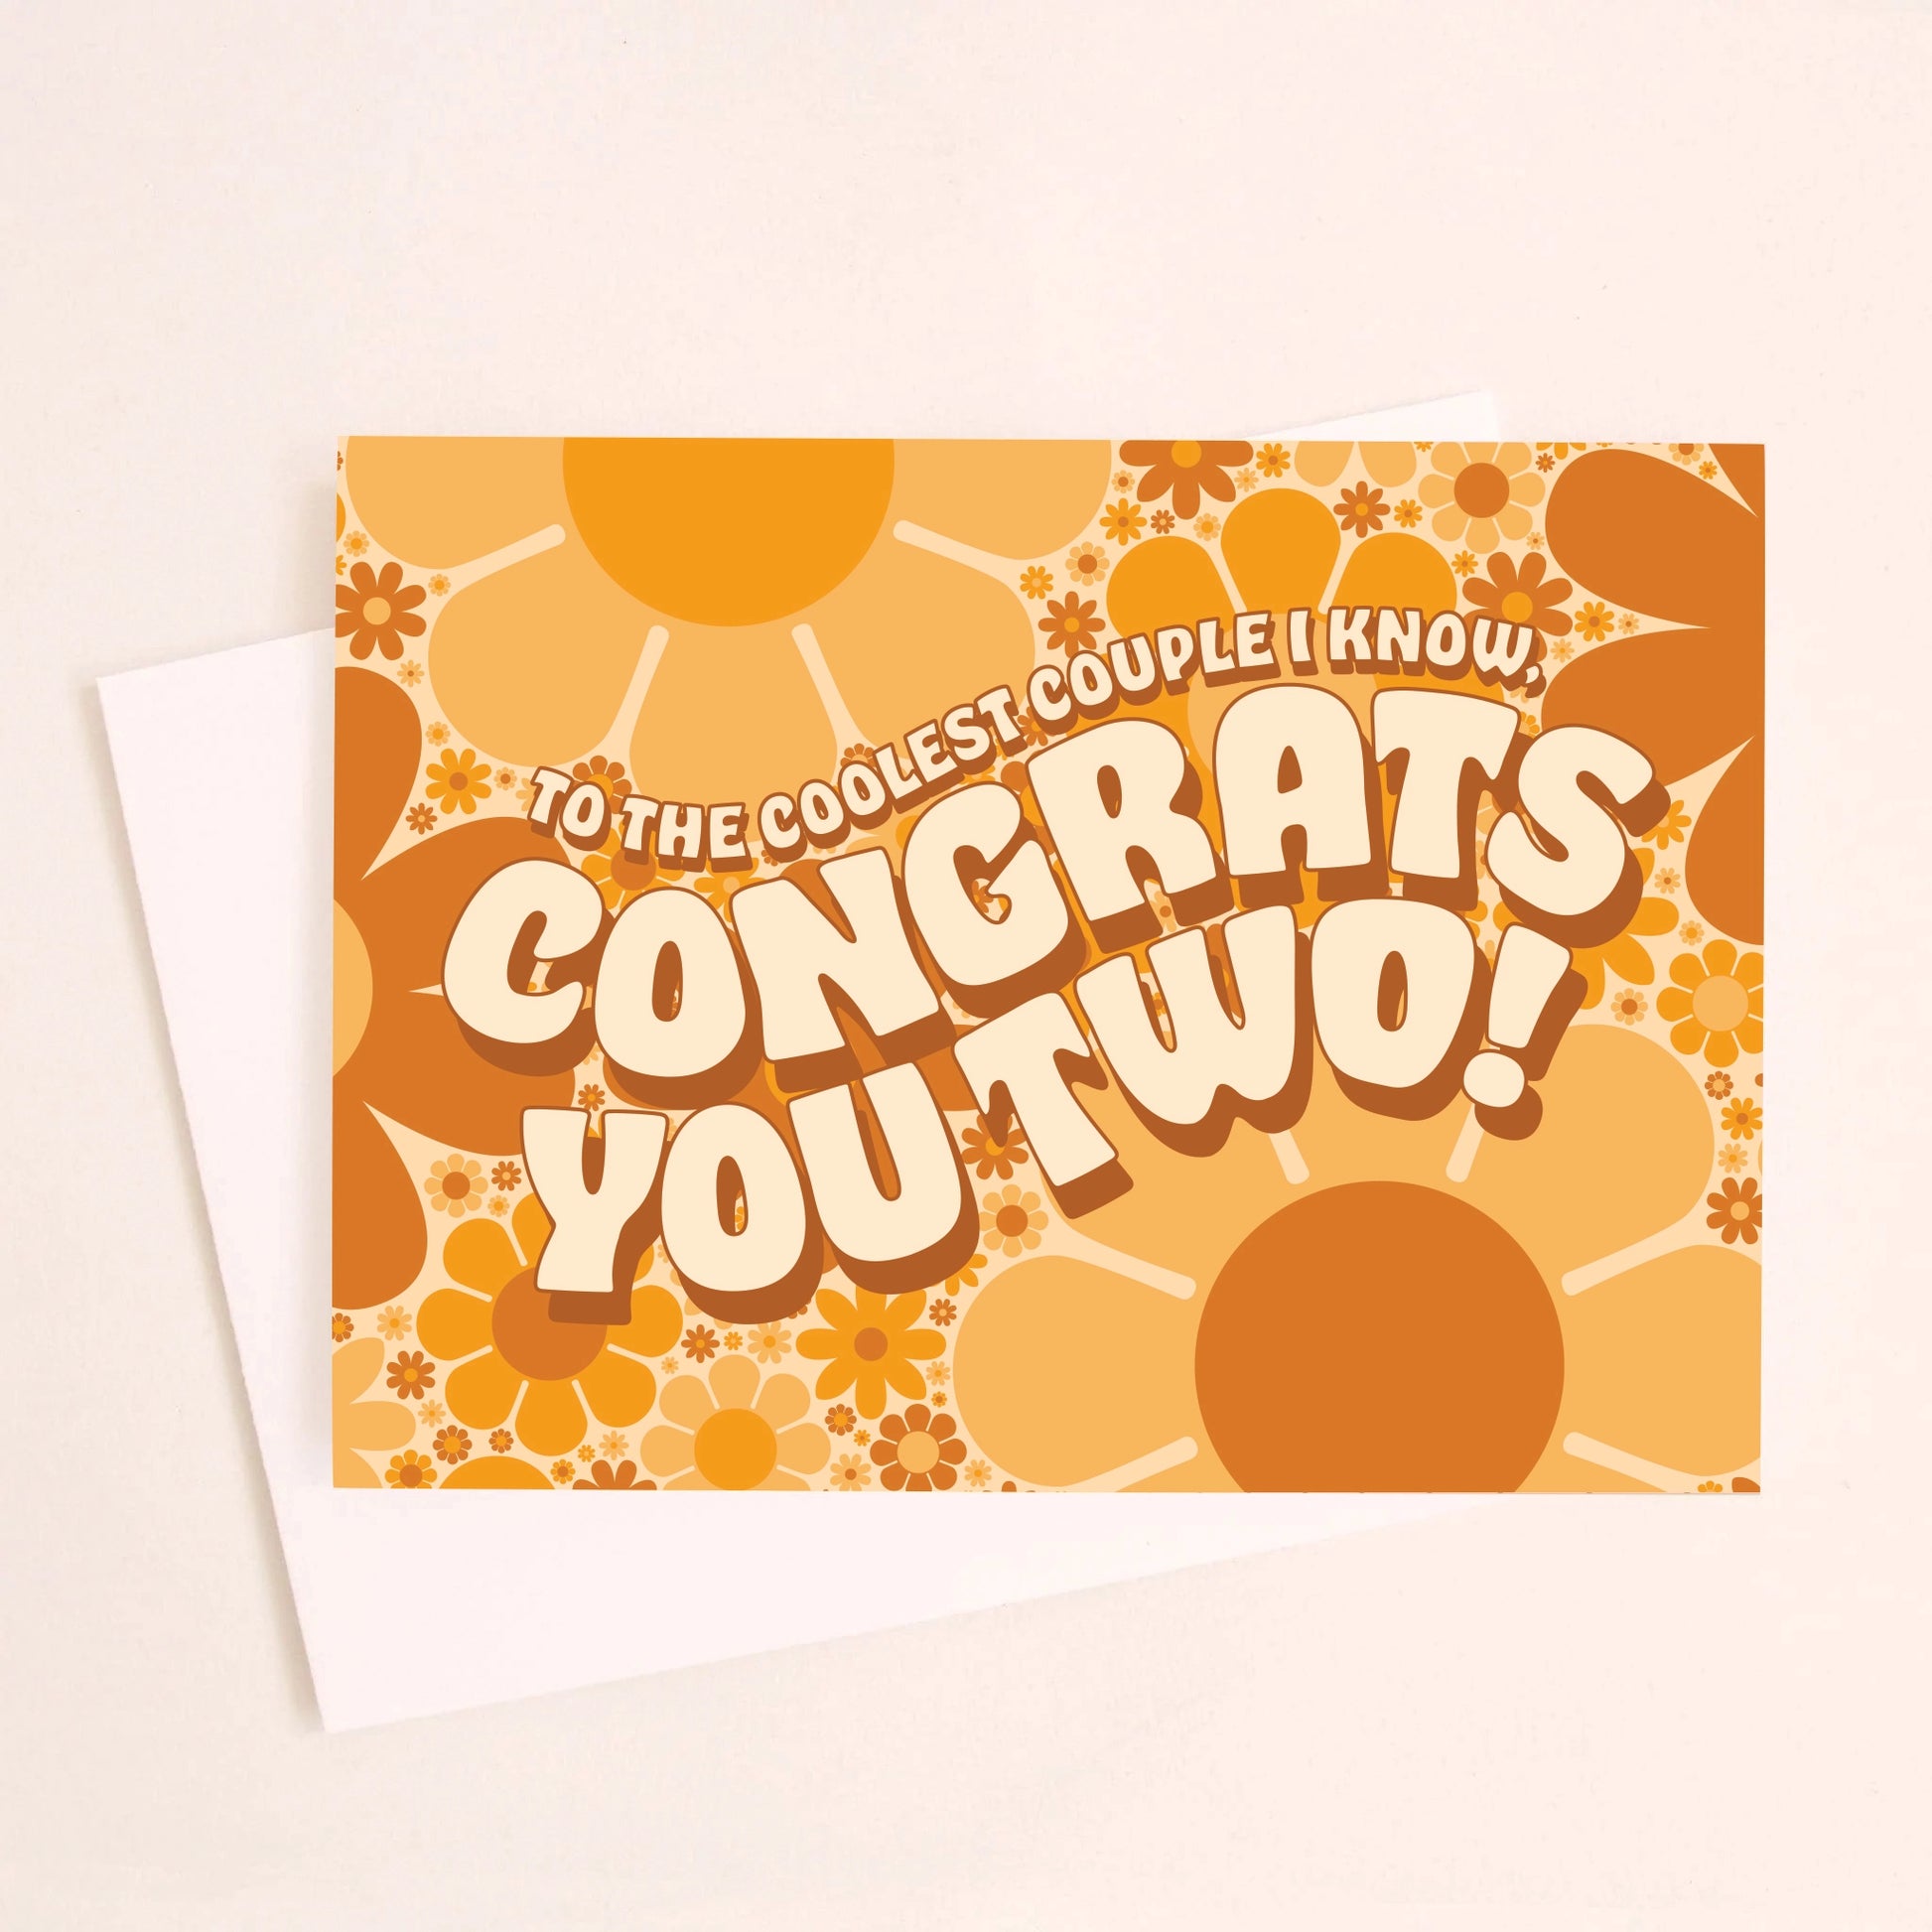 On an ivory background is a daisy print congratulations card with shades of orange and brown along with wavy text in the center that reads, "To The Coolest Couple I Know, Congrats You Two!". 